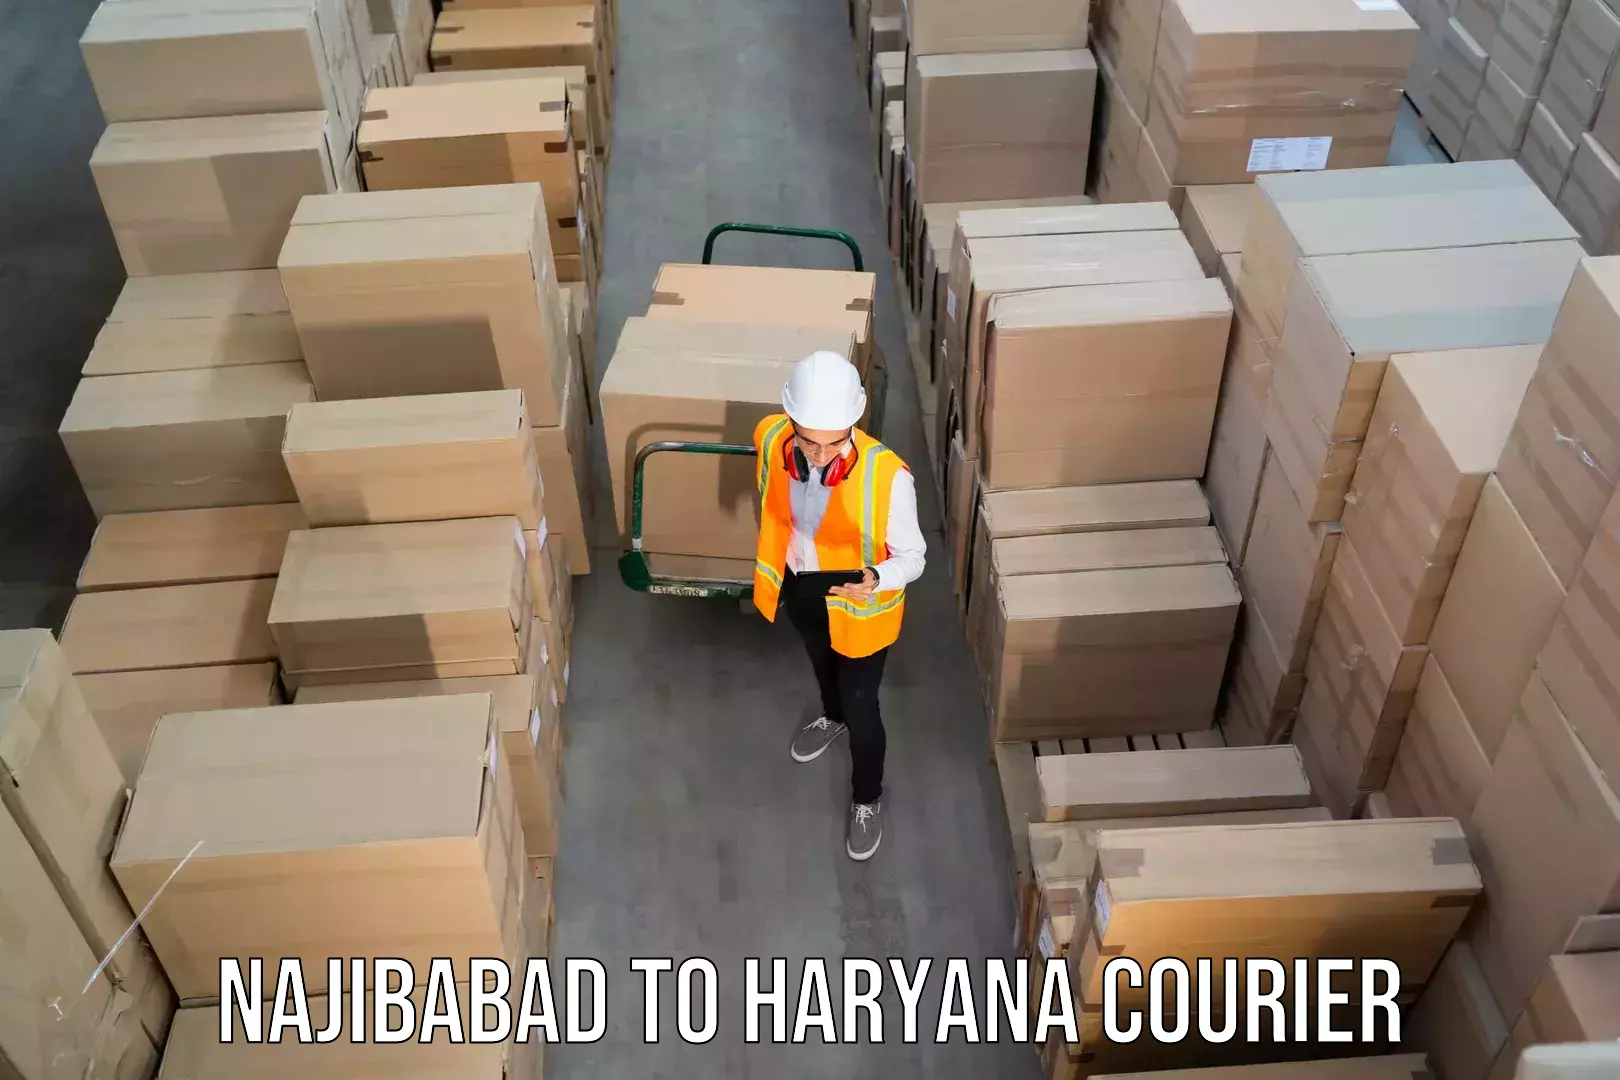 Scheduled delivery Najibabad to NCR Haryana